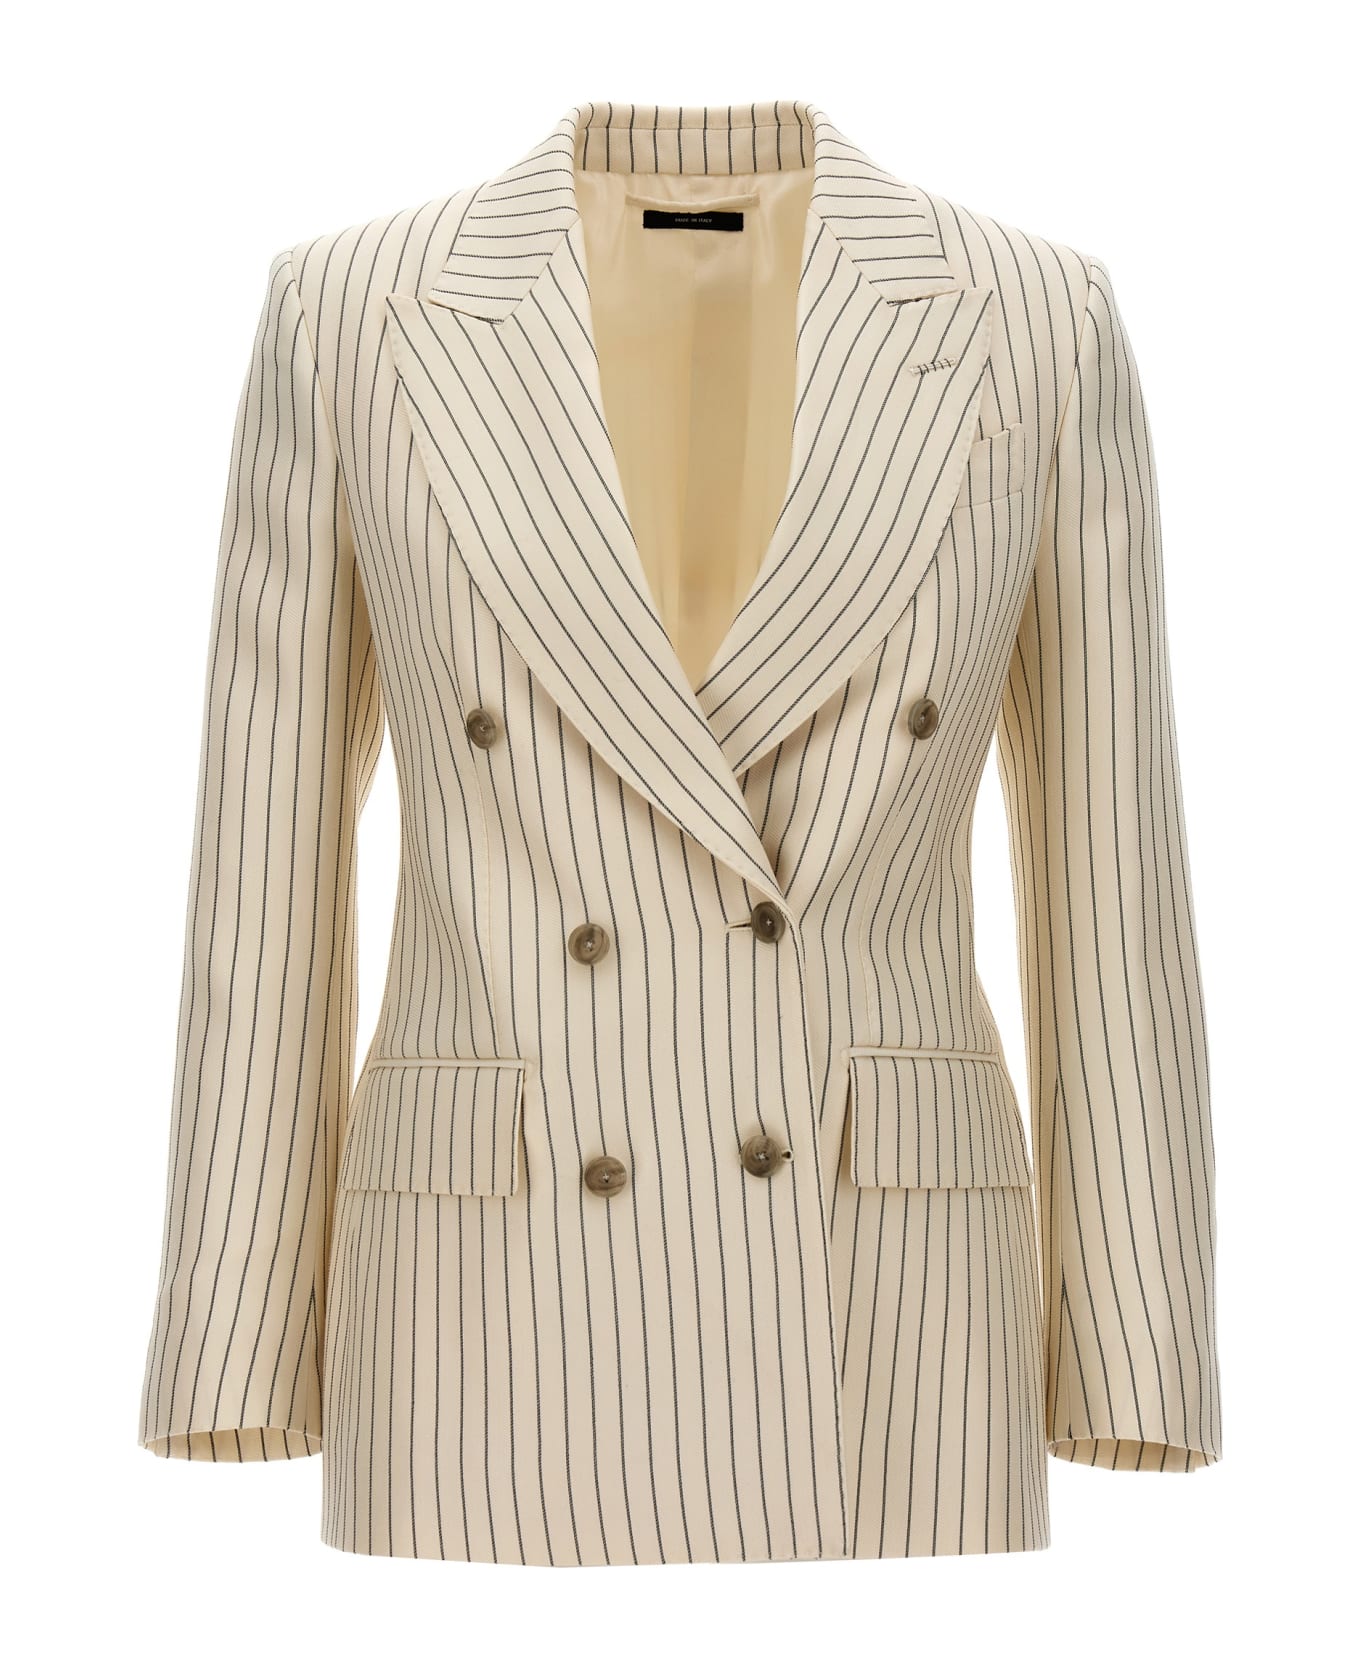 Tom Ford Striped Double-breasted Blazer